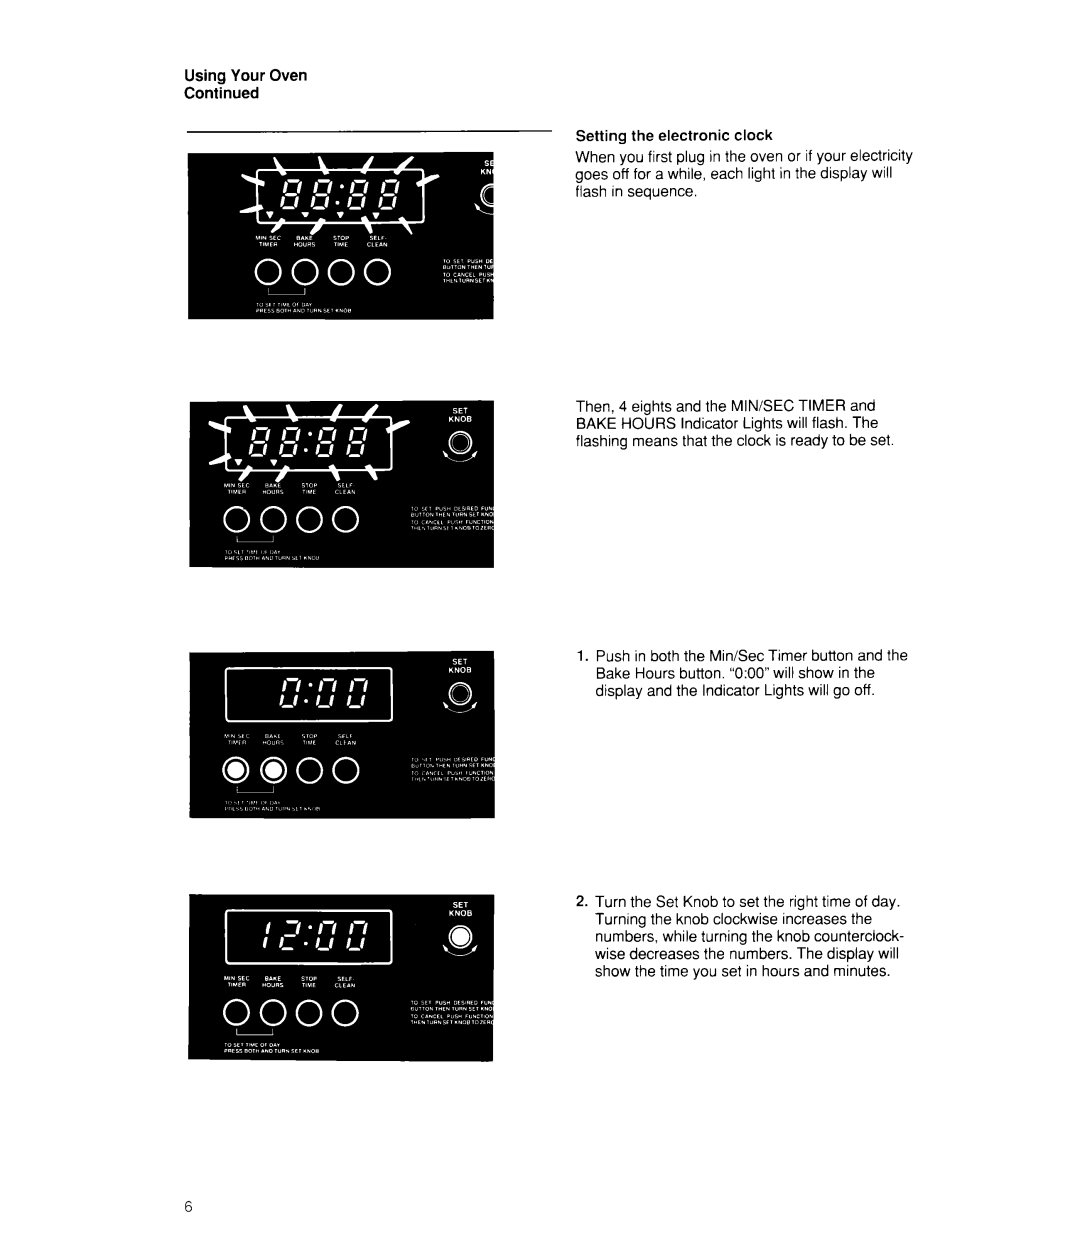 Whirlpool RB170PXX, RB770PXX, RB760PXX, RB160PXX manual Using Your Oven Continued, Setting the electronic clock 